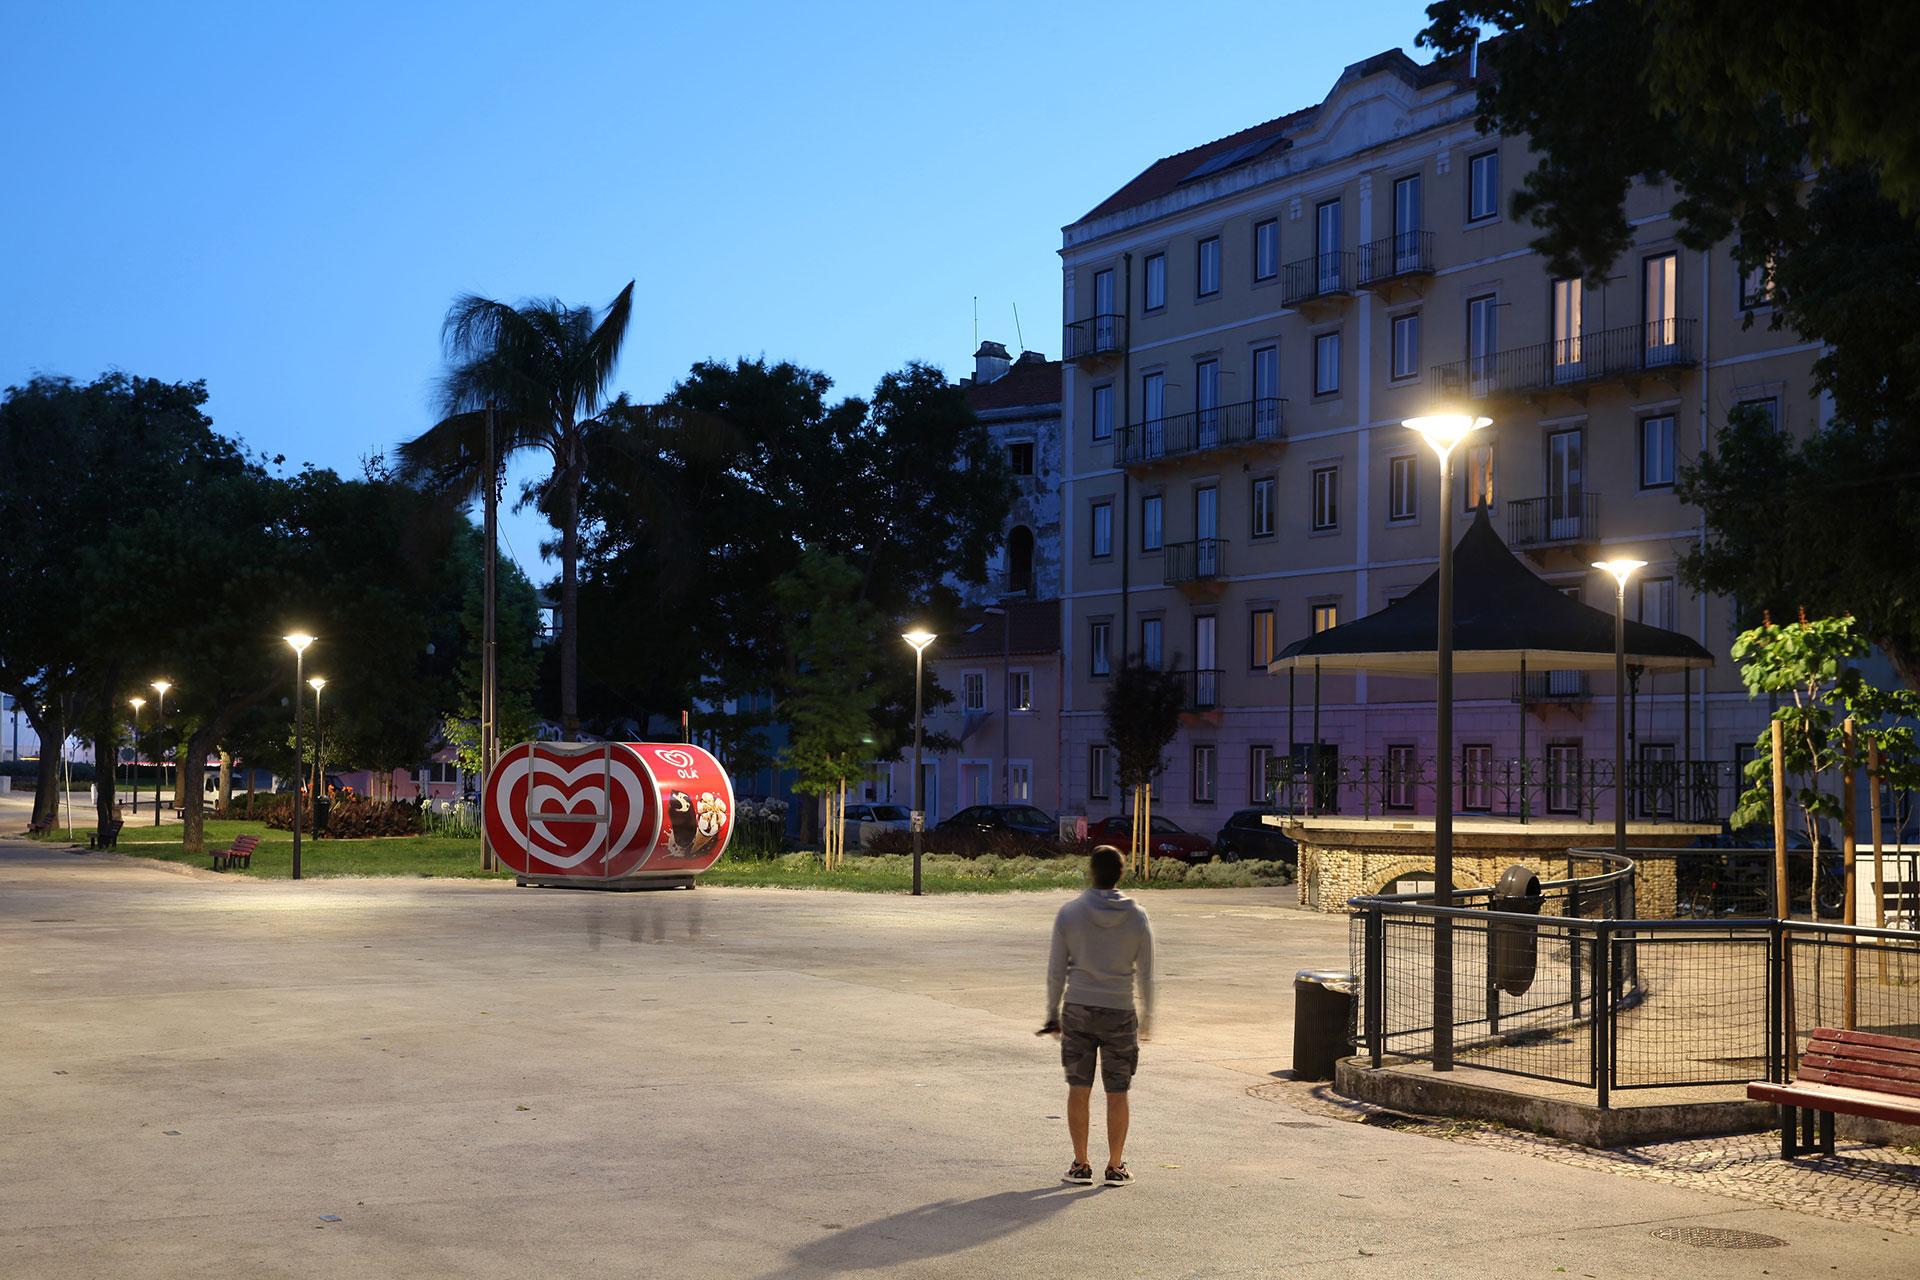 The Oyo delivers a warm white light to turn Paco de Arcos park into an inviting nocturnal space